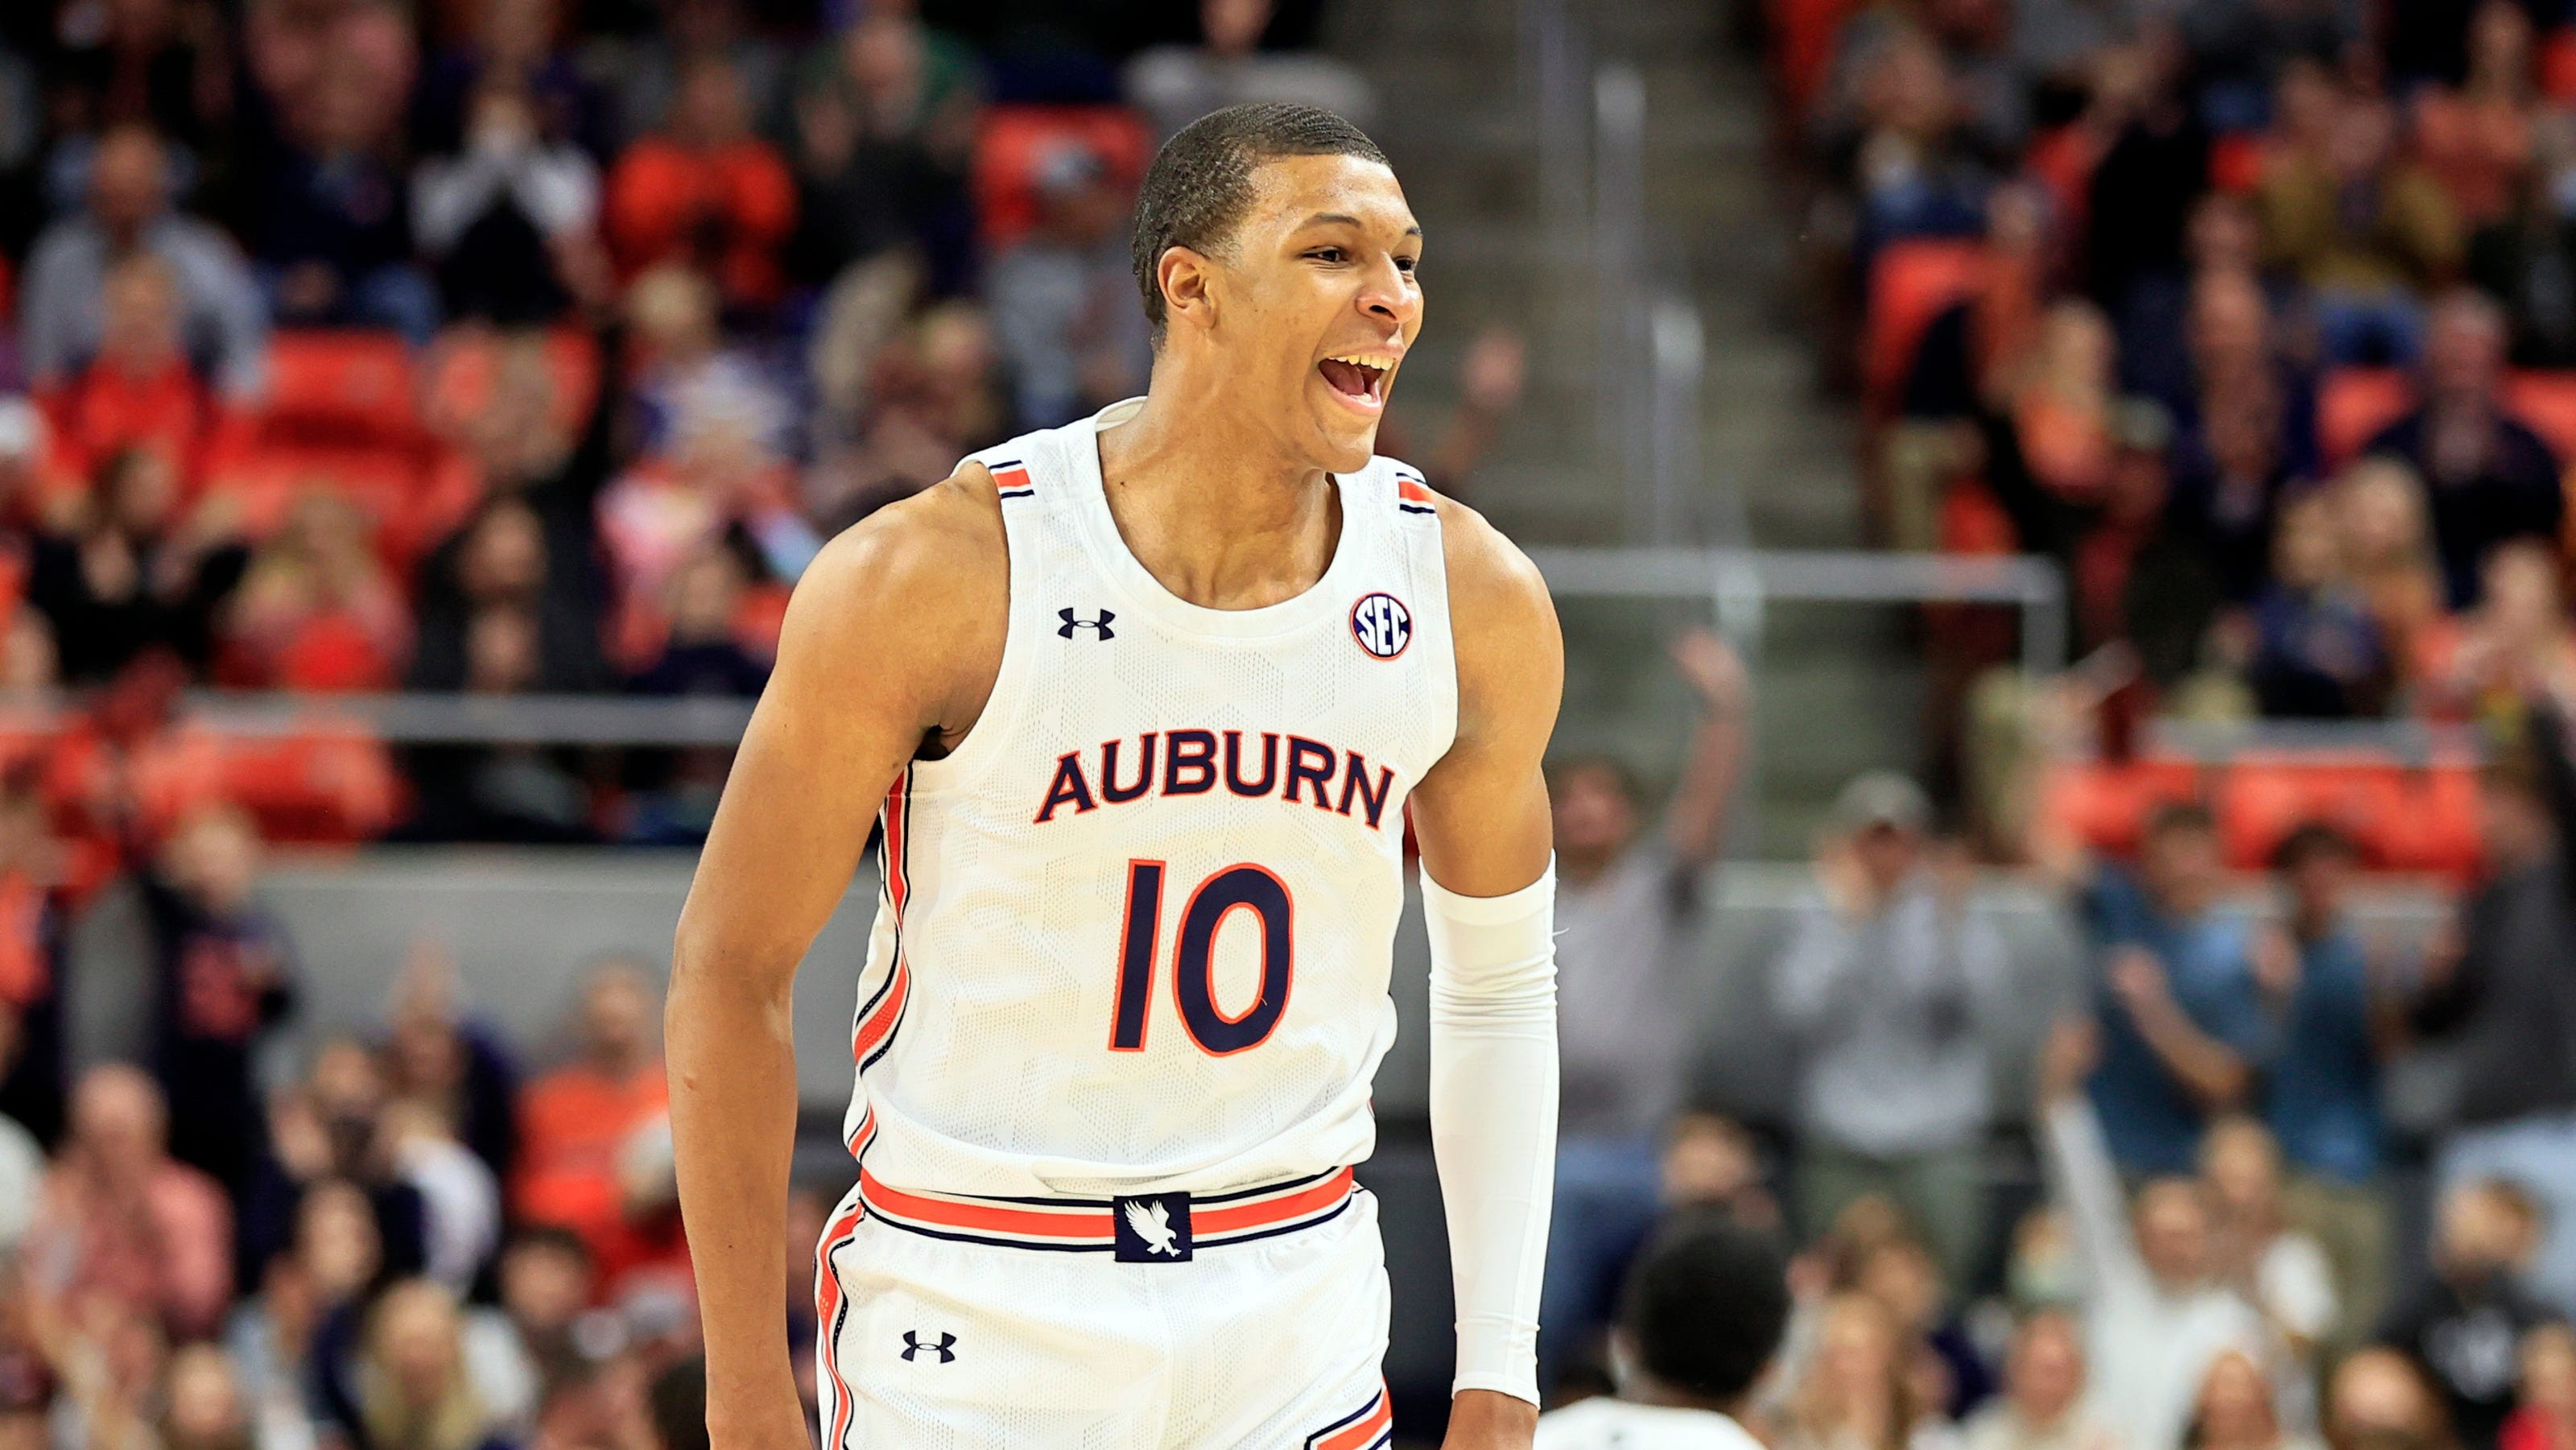 Kentucky basketball at Auburn How to watch, game time, TV channel, streaming